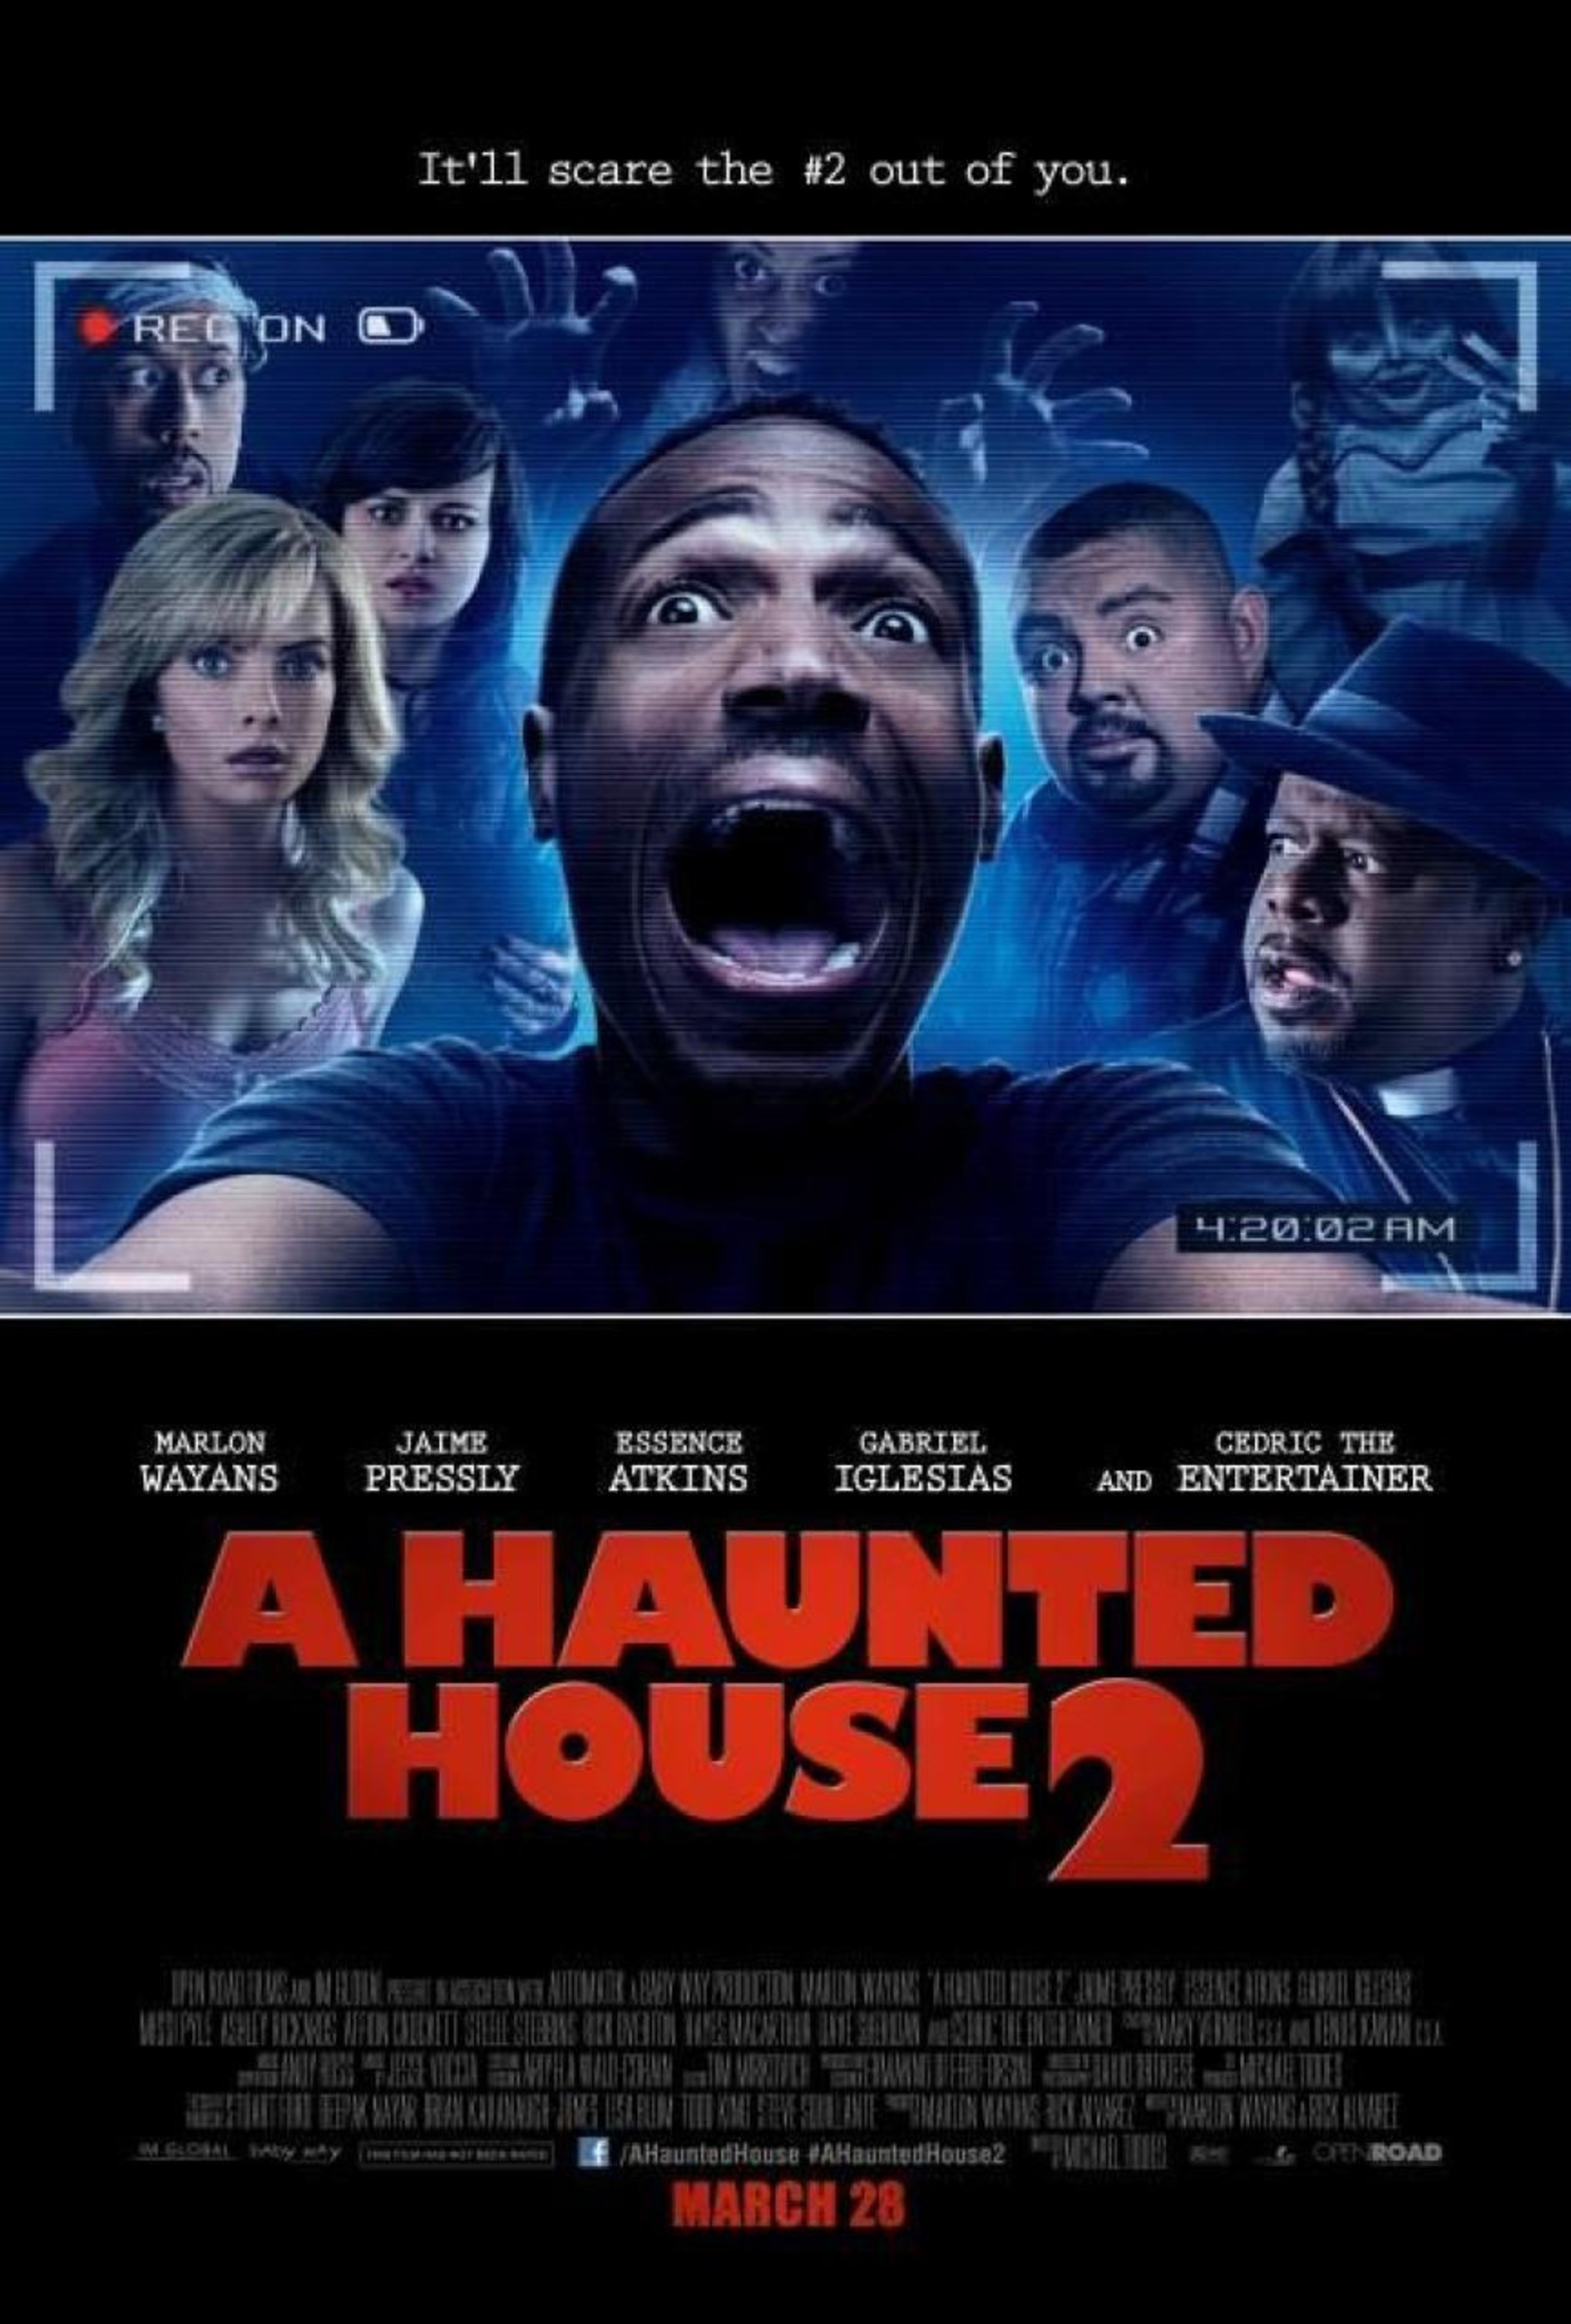 Regal offers free digital HD copy of "A Haunted House" when purchasing tickets to the new film "A Haunted House 2." Image Source: Open Road Films (PRNewsFoto/Regal Entertainment Group)